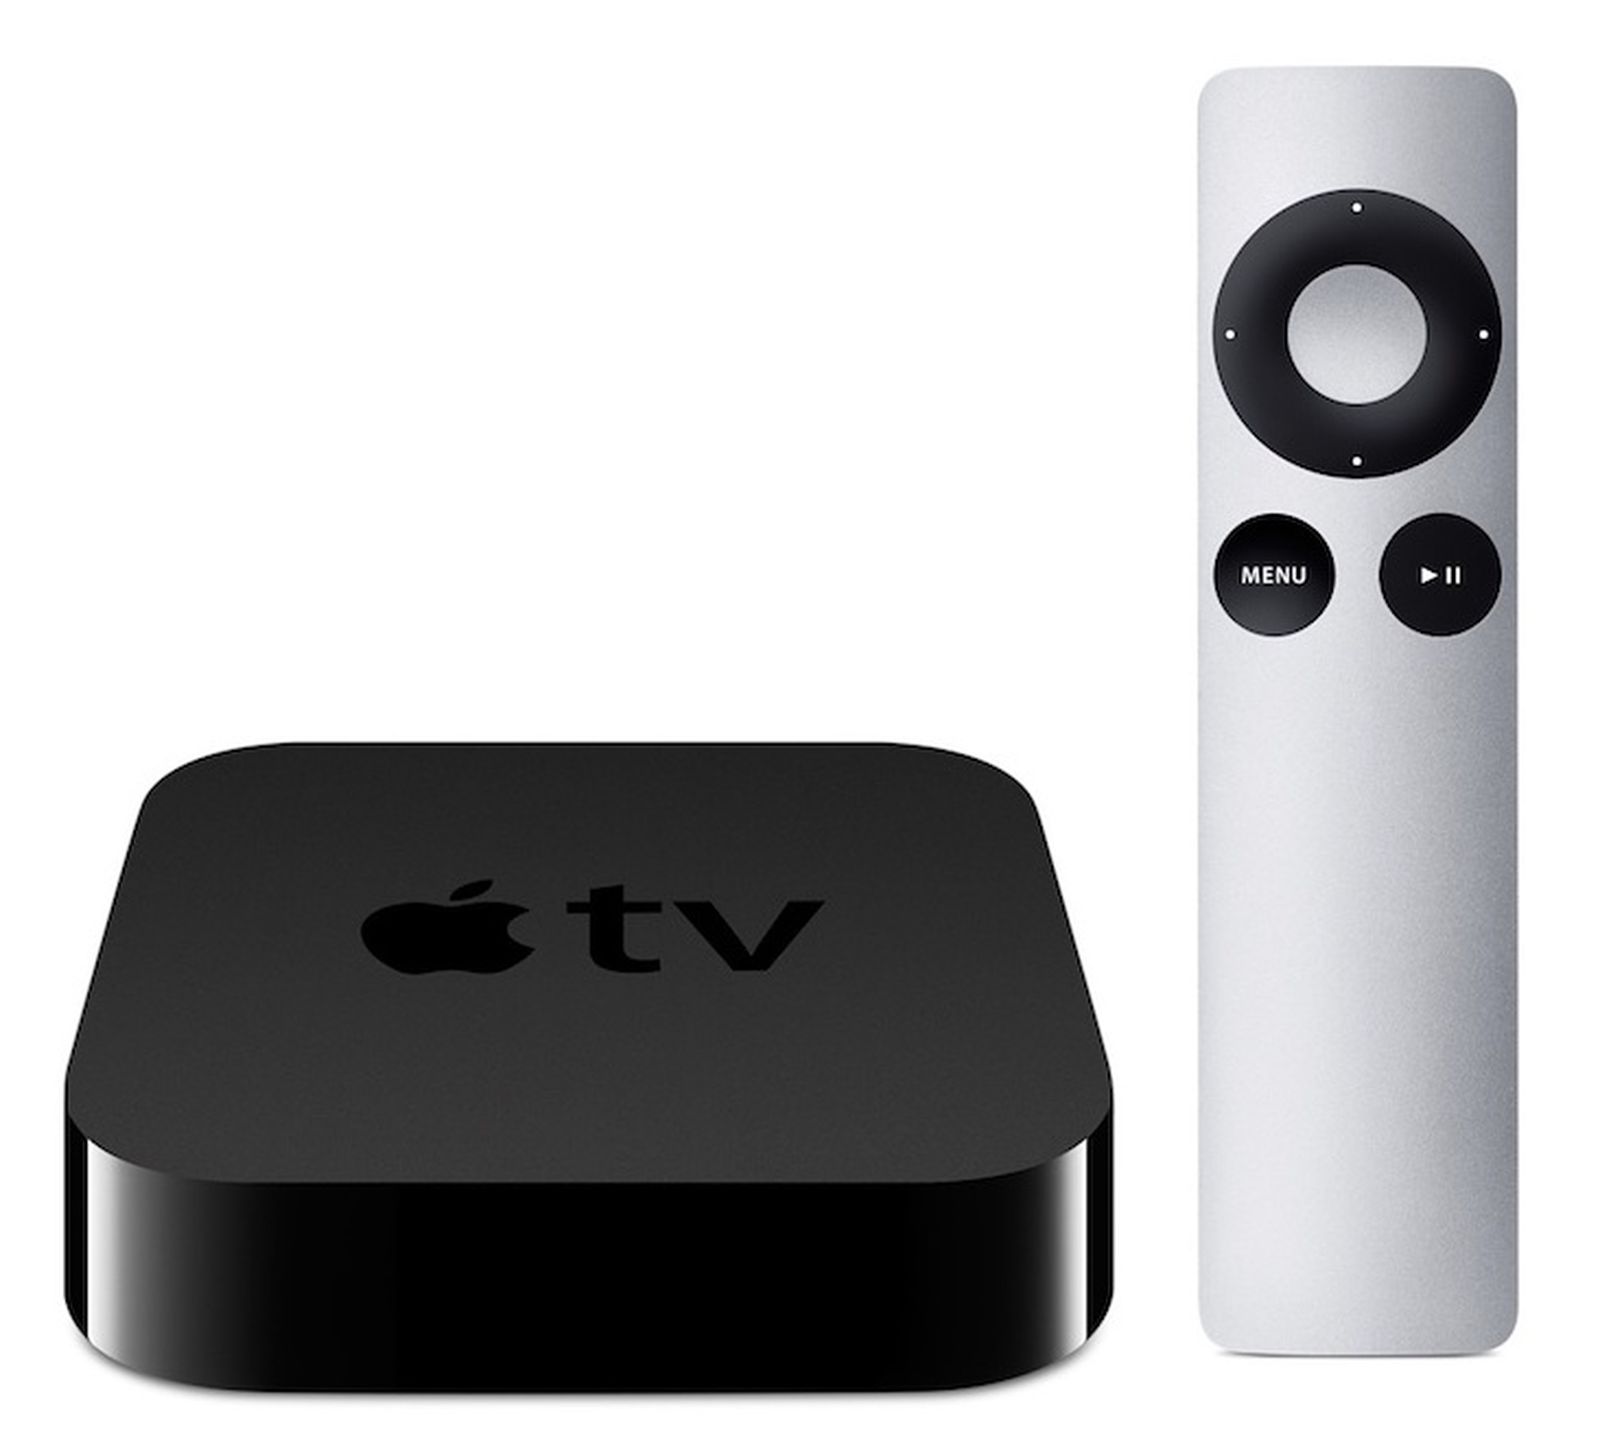 How old is Apple TV 3rd generation?